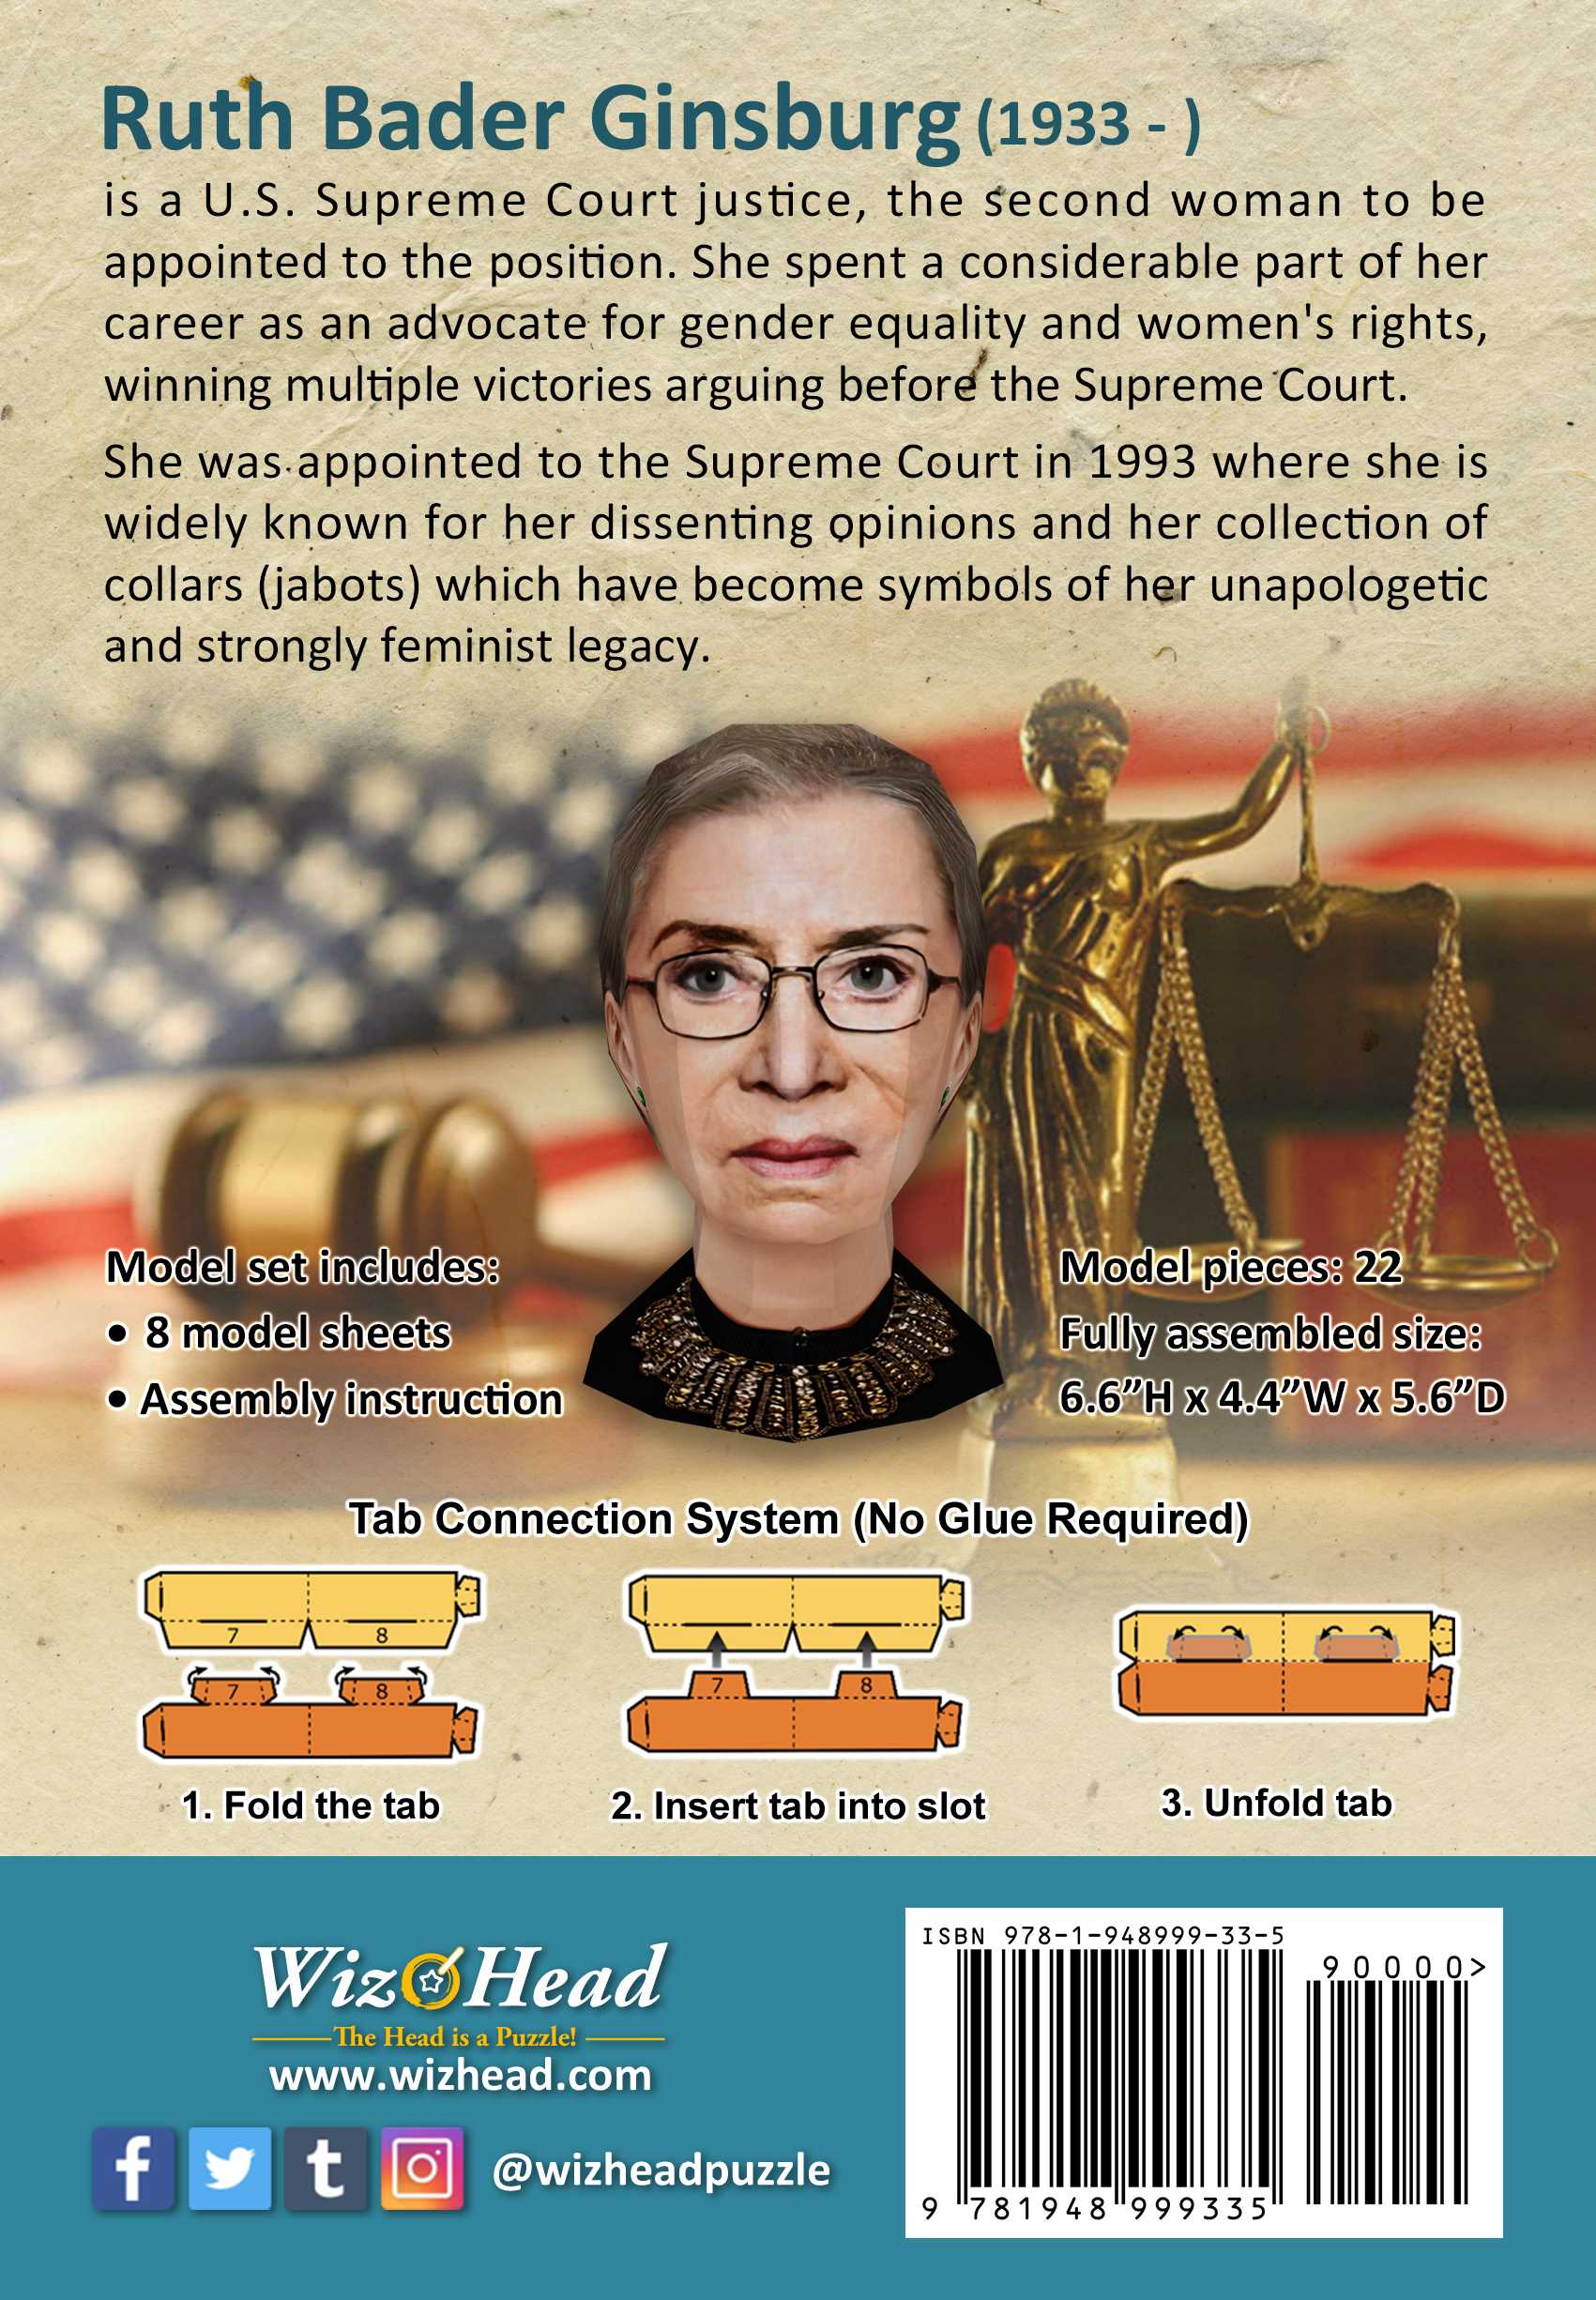 Ruth Ginsburg (Full Size)